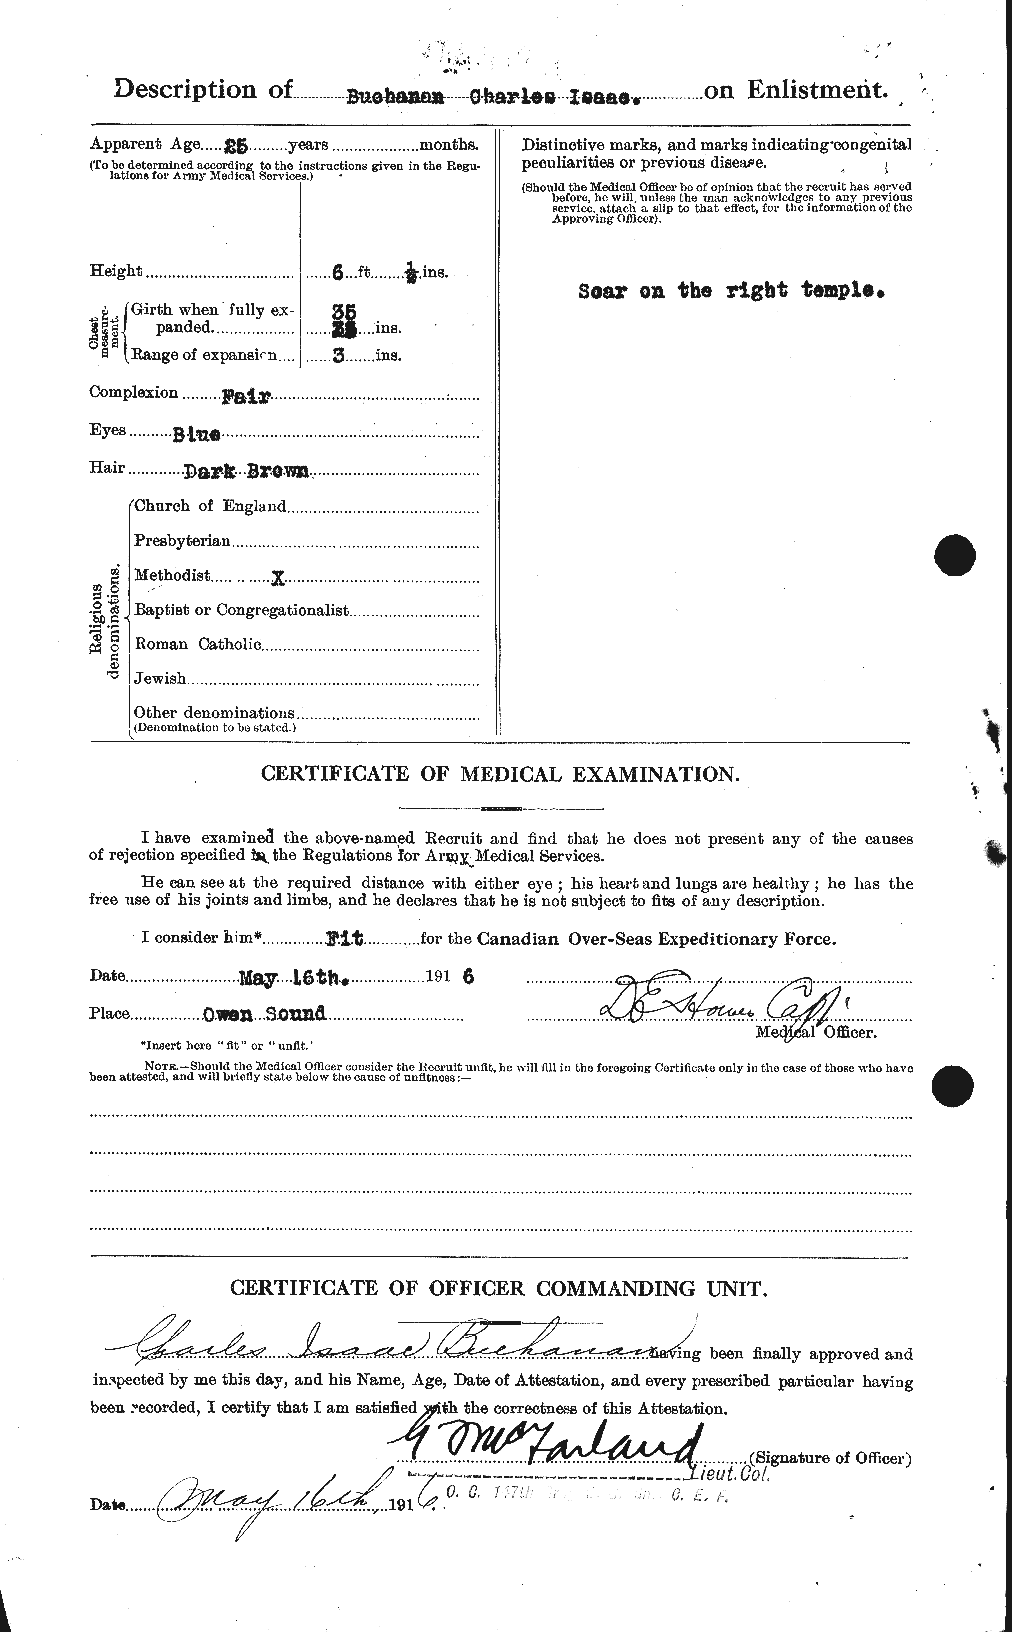 Personnel Records of the First World War - CEF 269135b